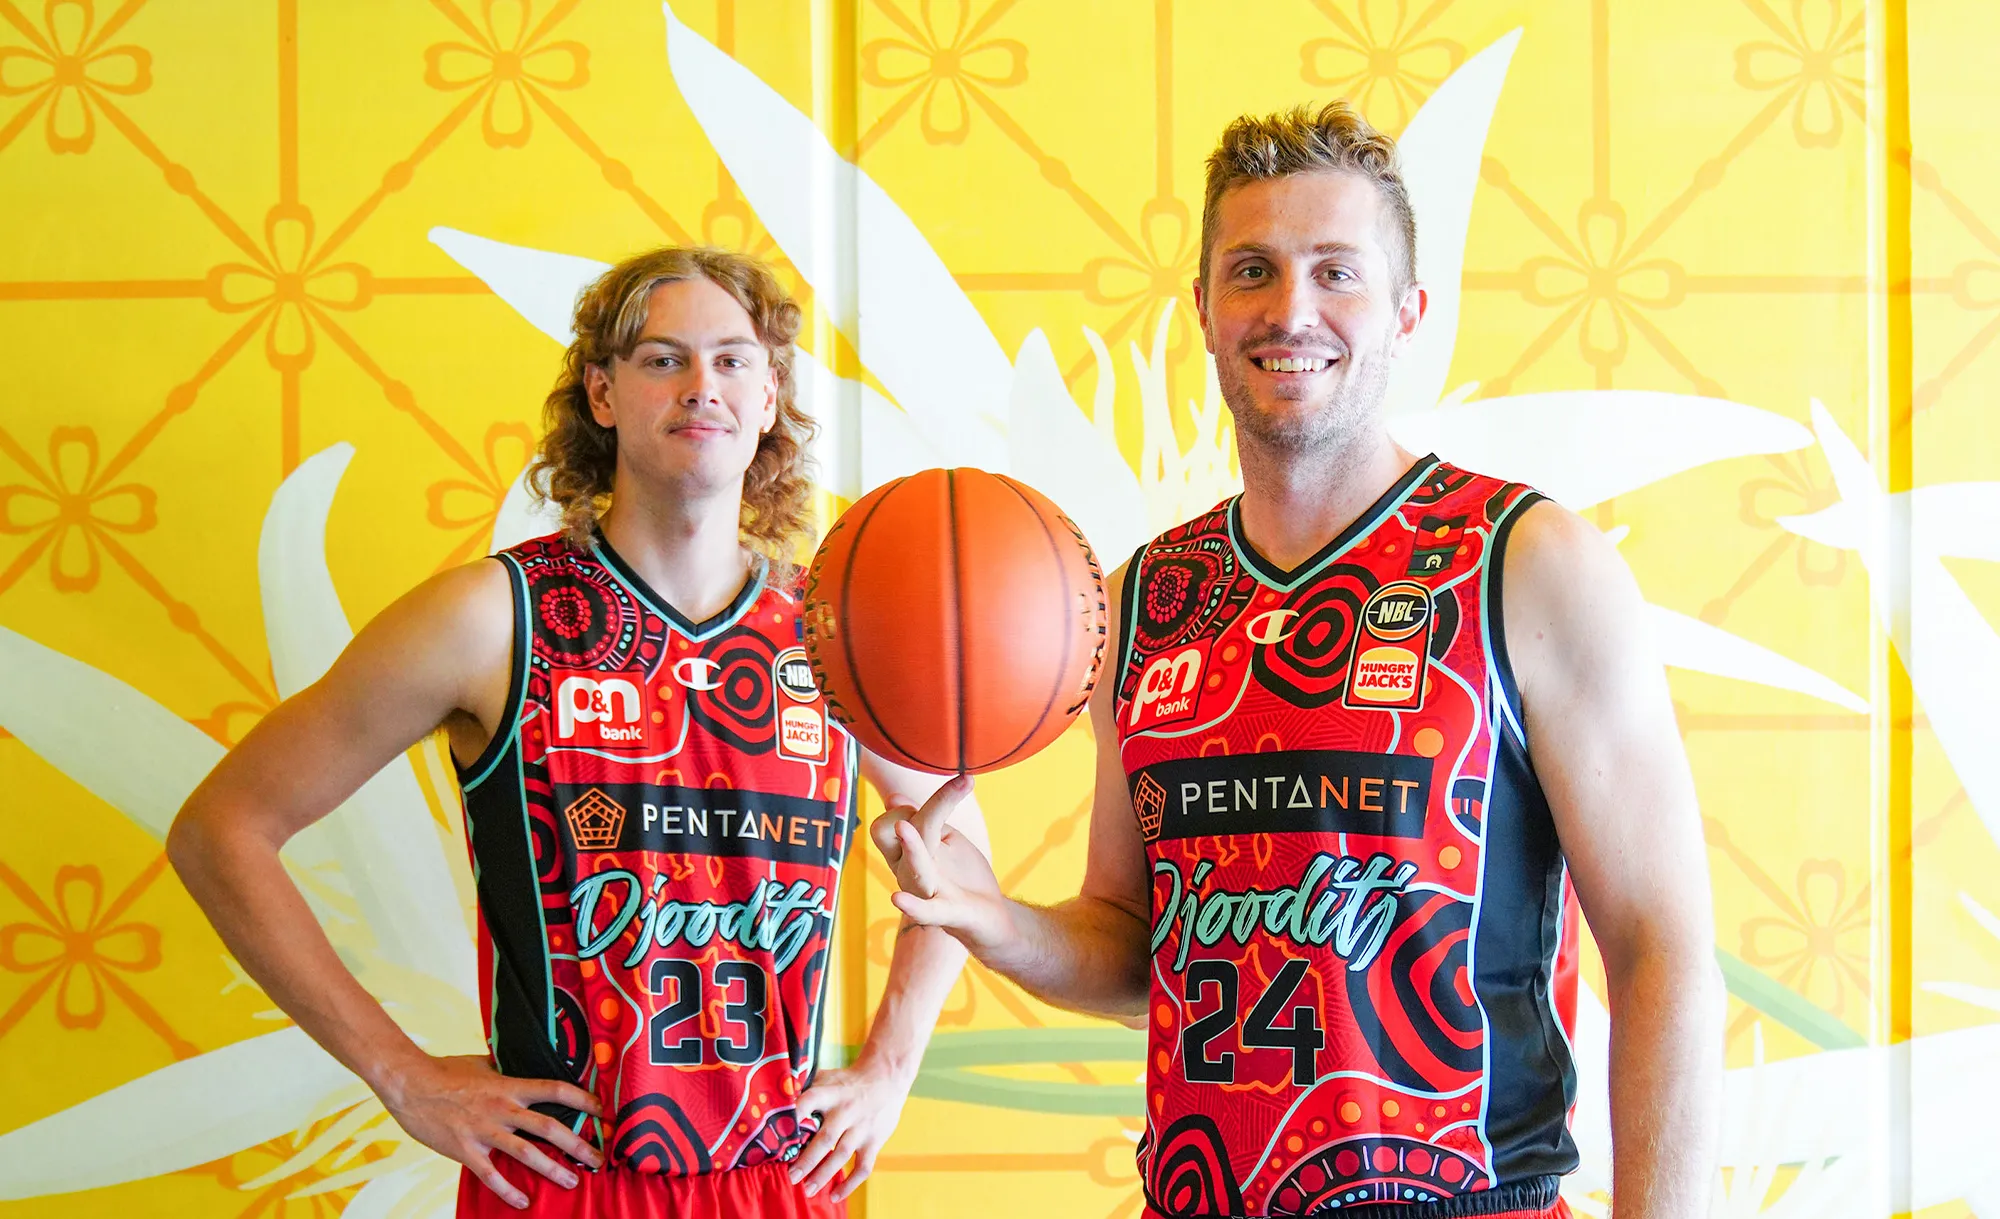 NBL Indigenous Round Jersey Stories